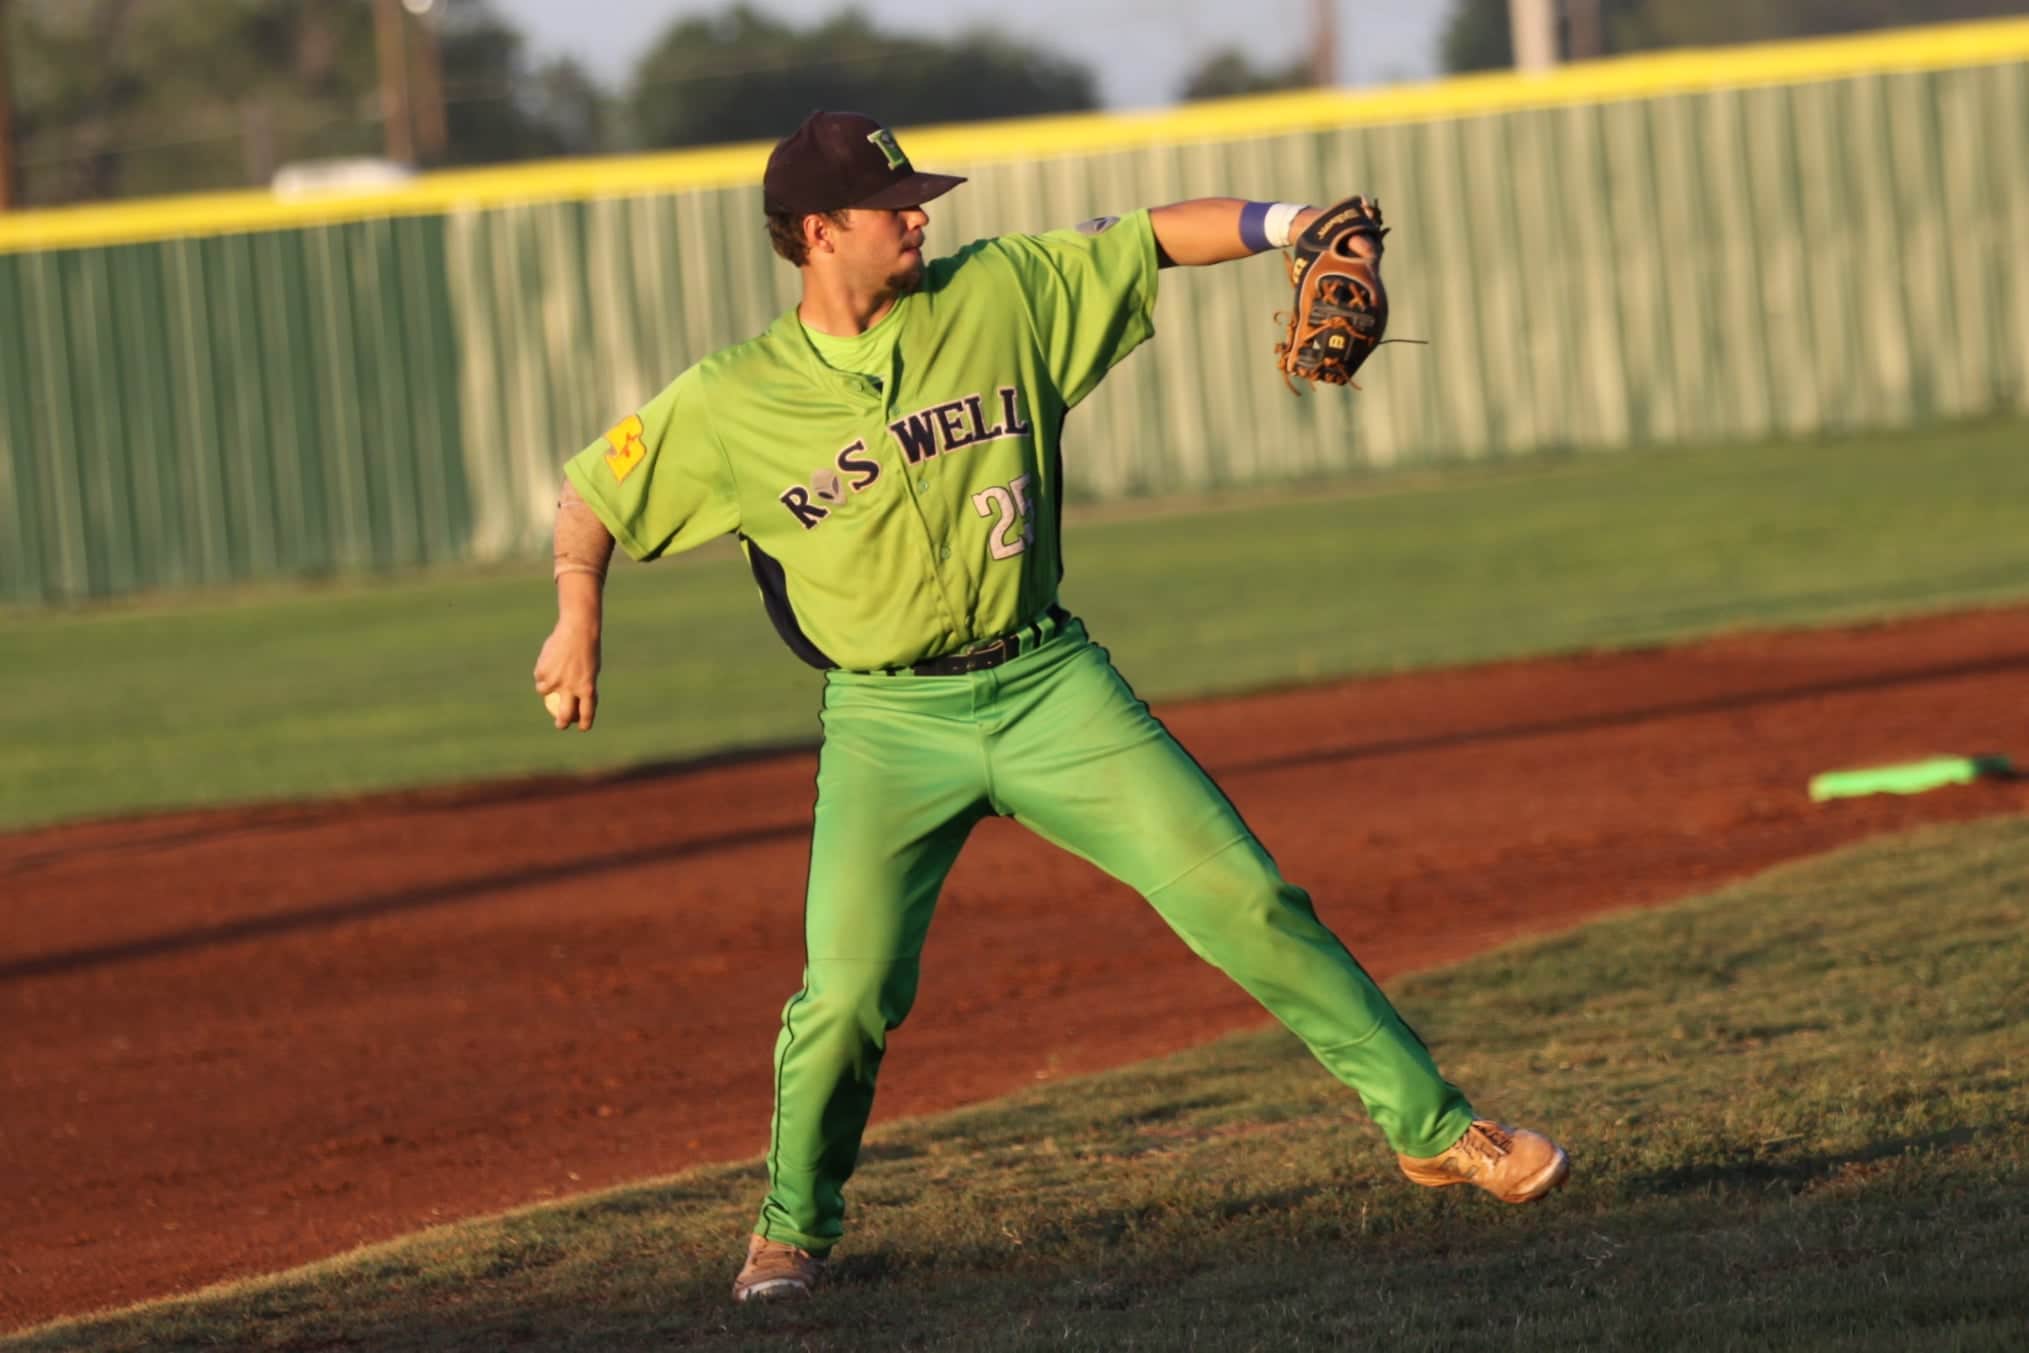 Pitcher for the Roswell Invaders baseball team